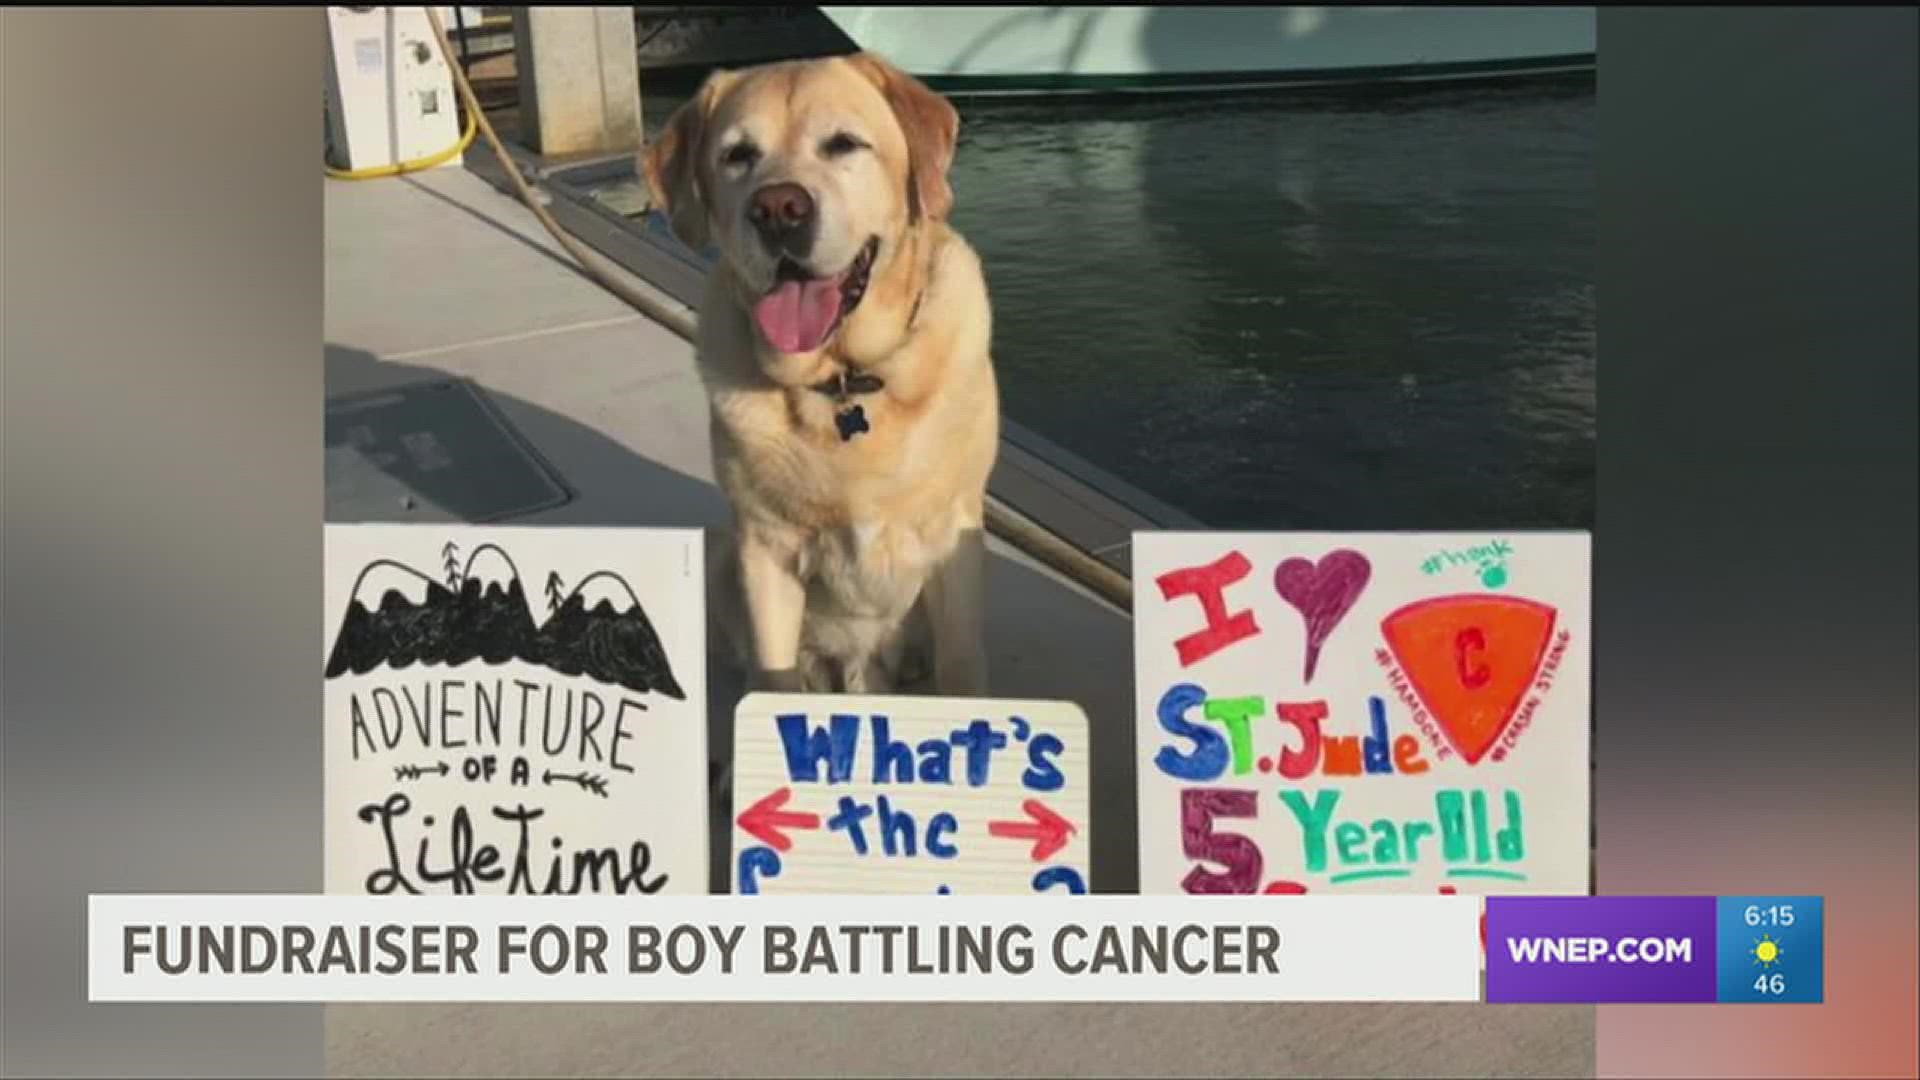 A man and his dog raise money for 5-year-old nephew battling cancer.